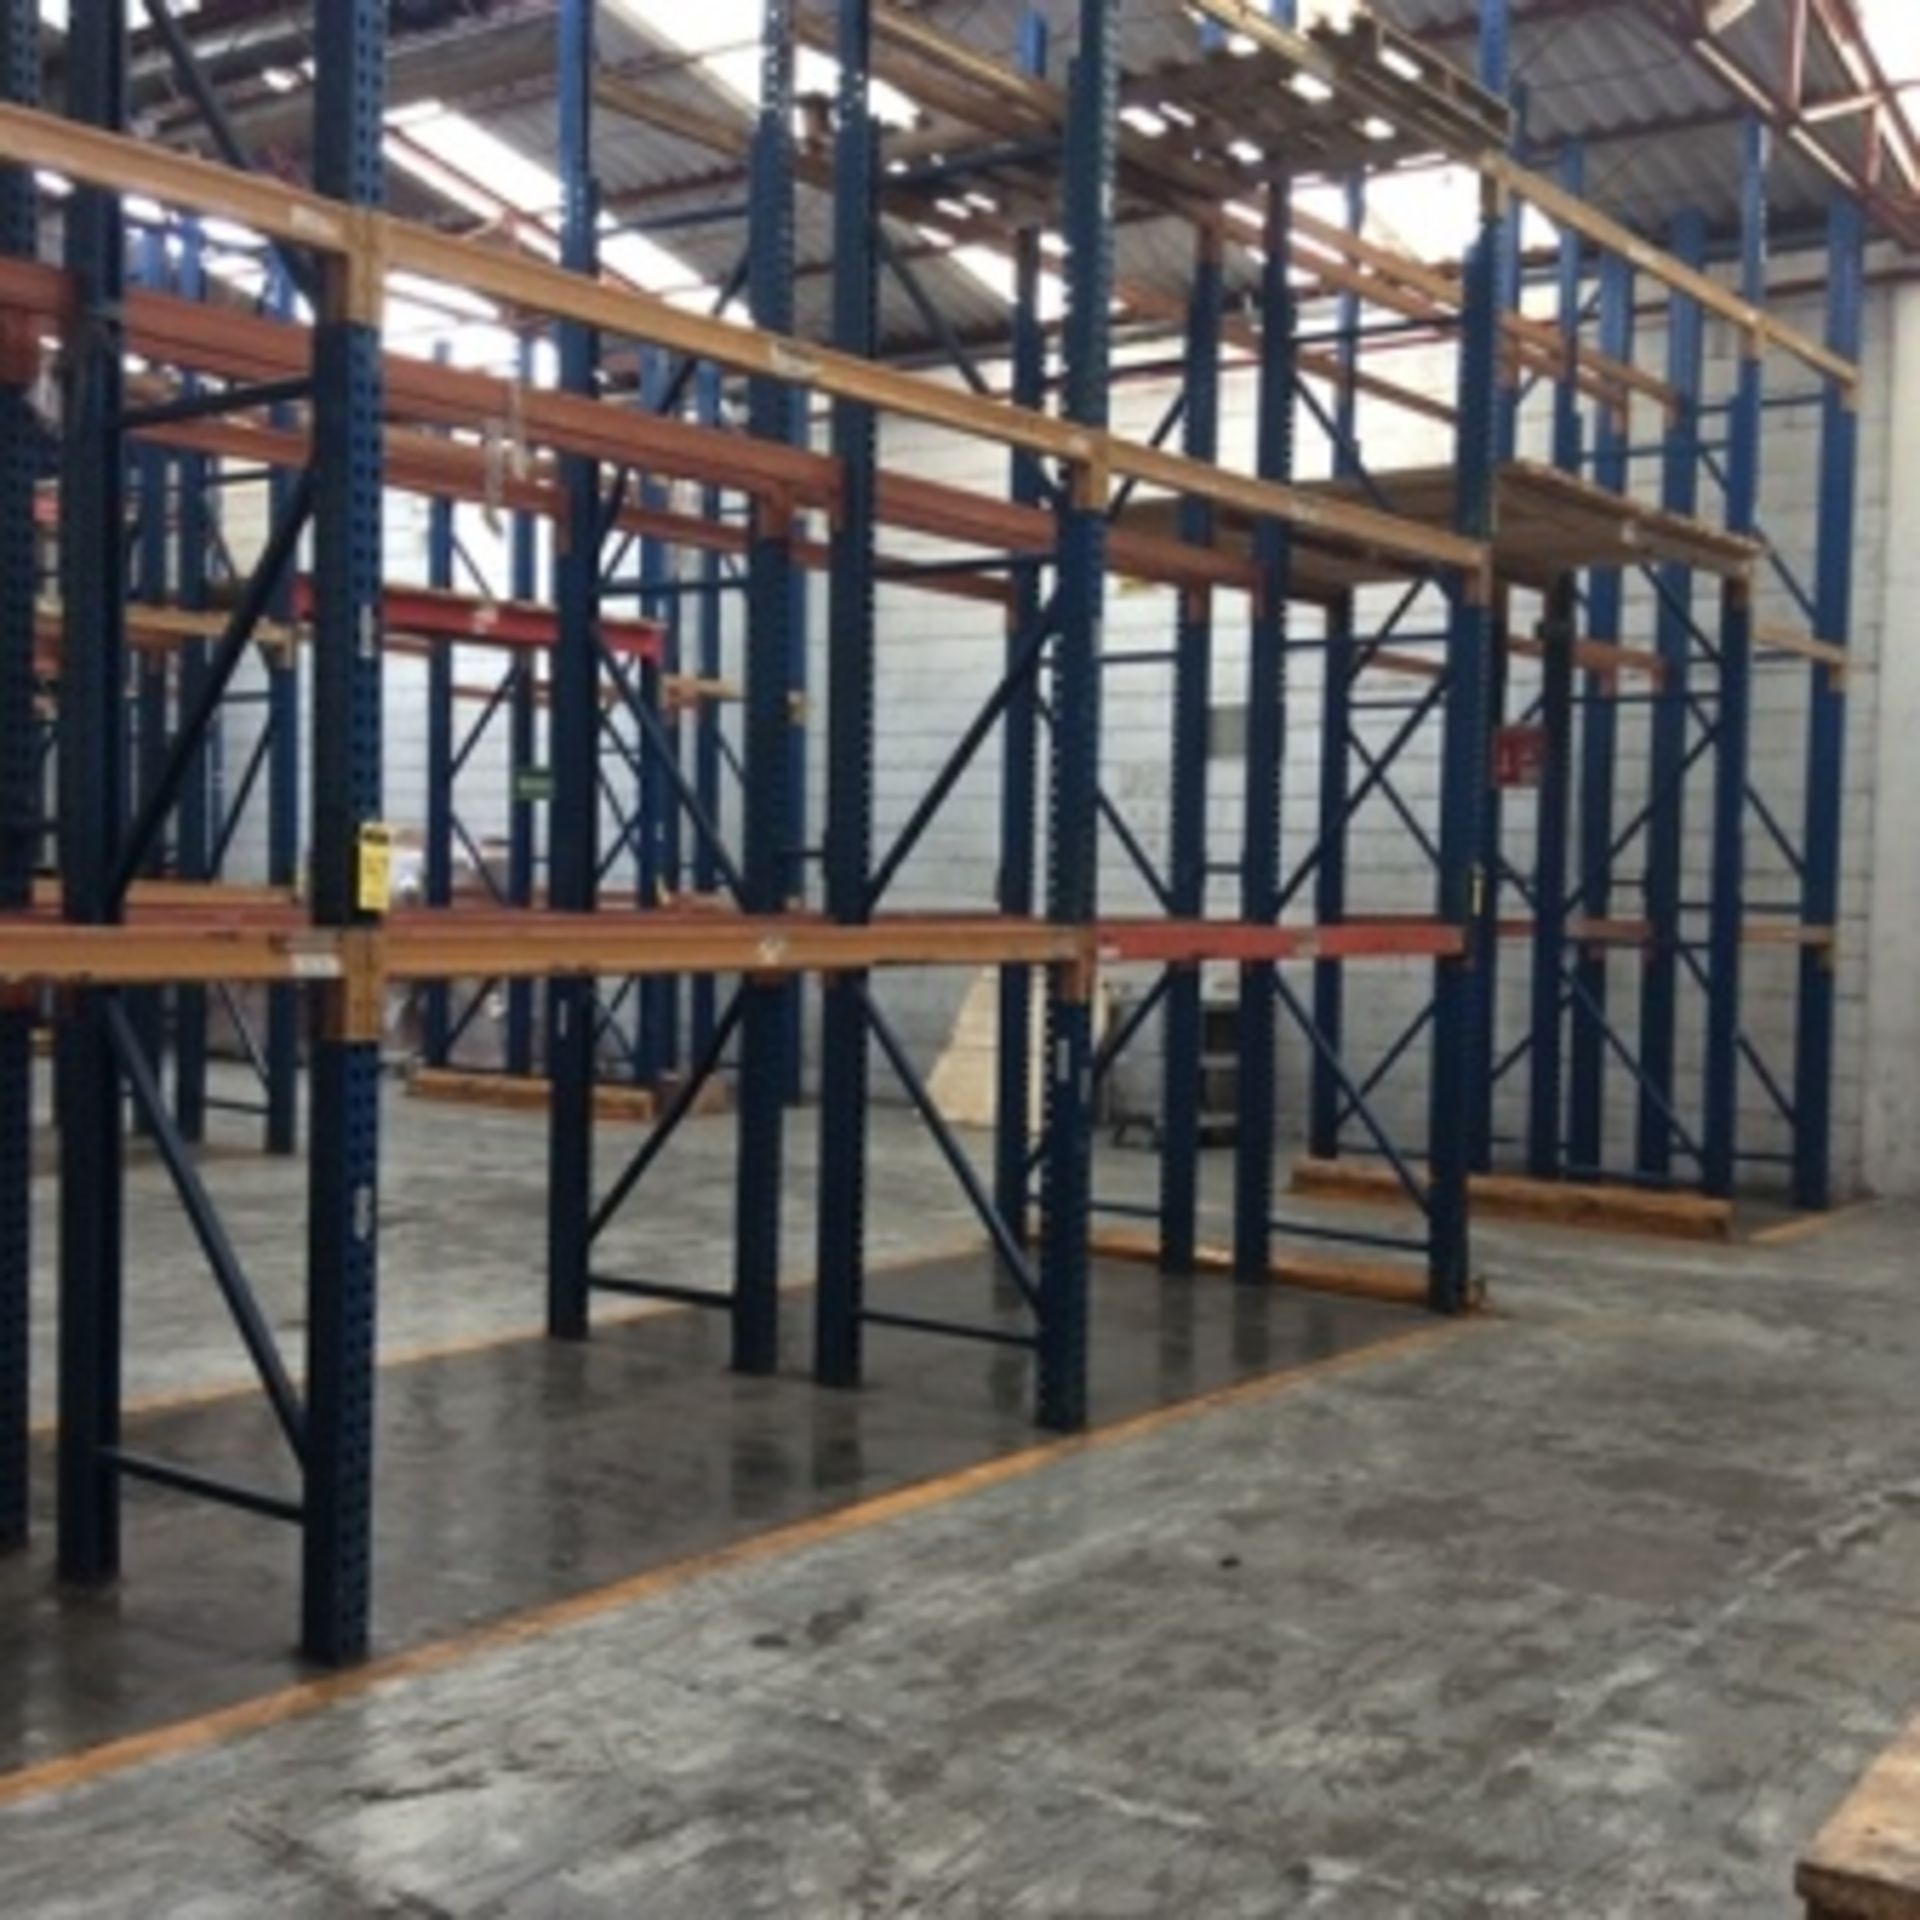 Vertical storage rack 8.70 x 0.91 x 4.60 m high consists of 3 levels 2.34 x 0.91 in depth … - Image 3 of 10